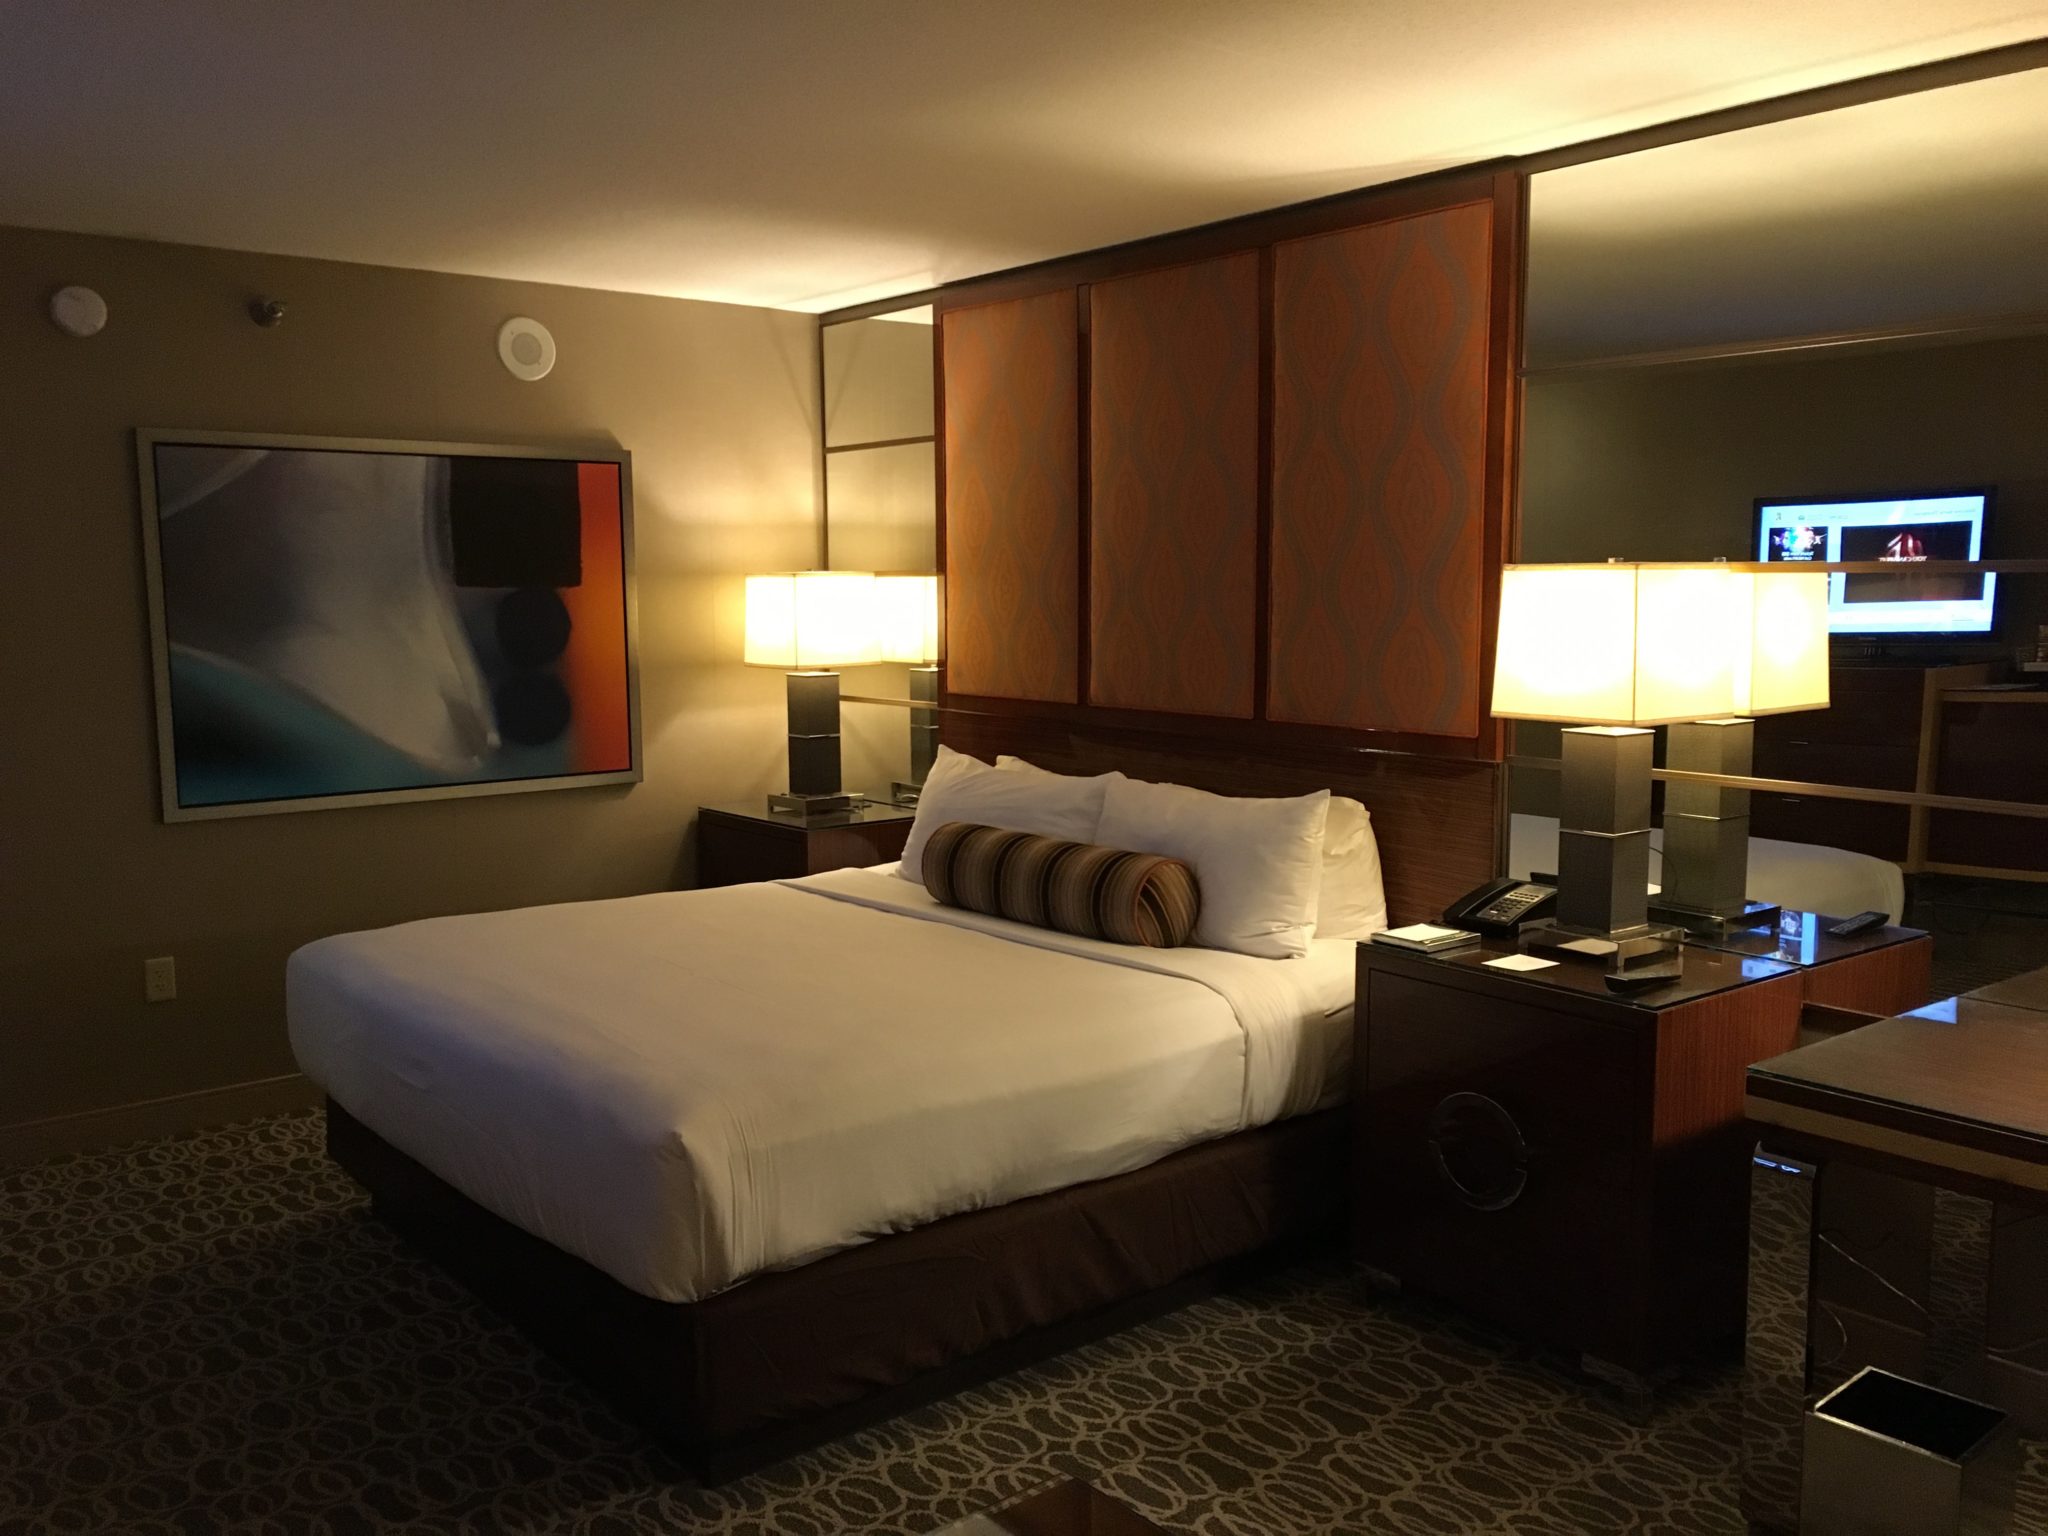 mgm grand hotel casino queen bed